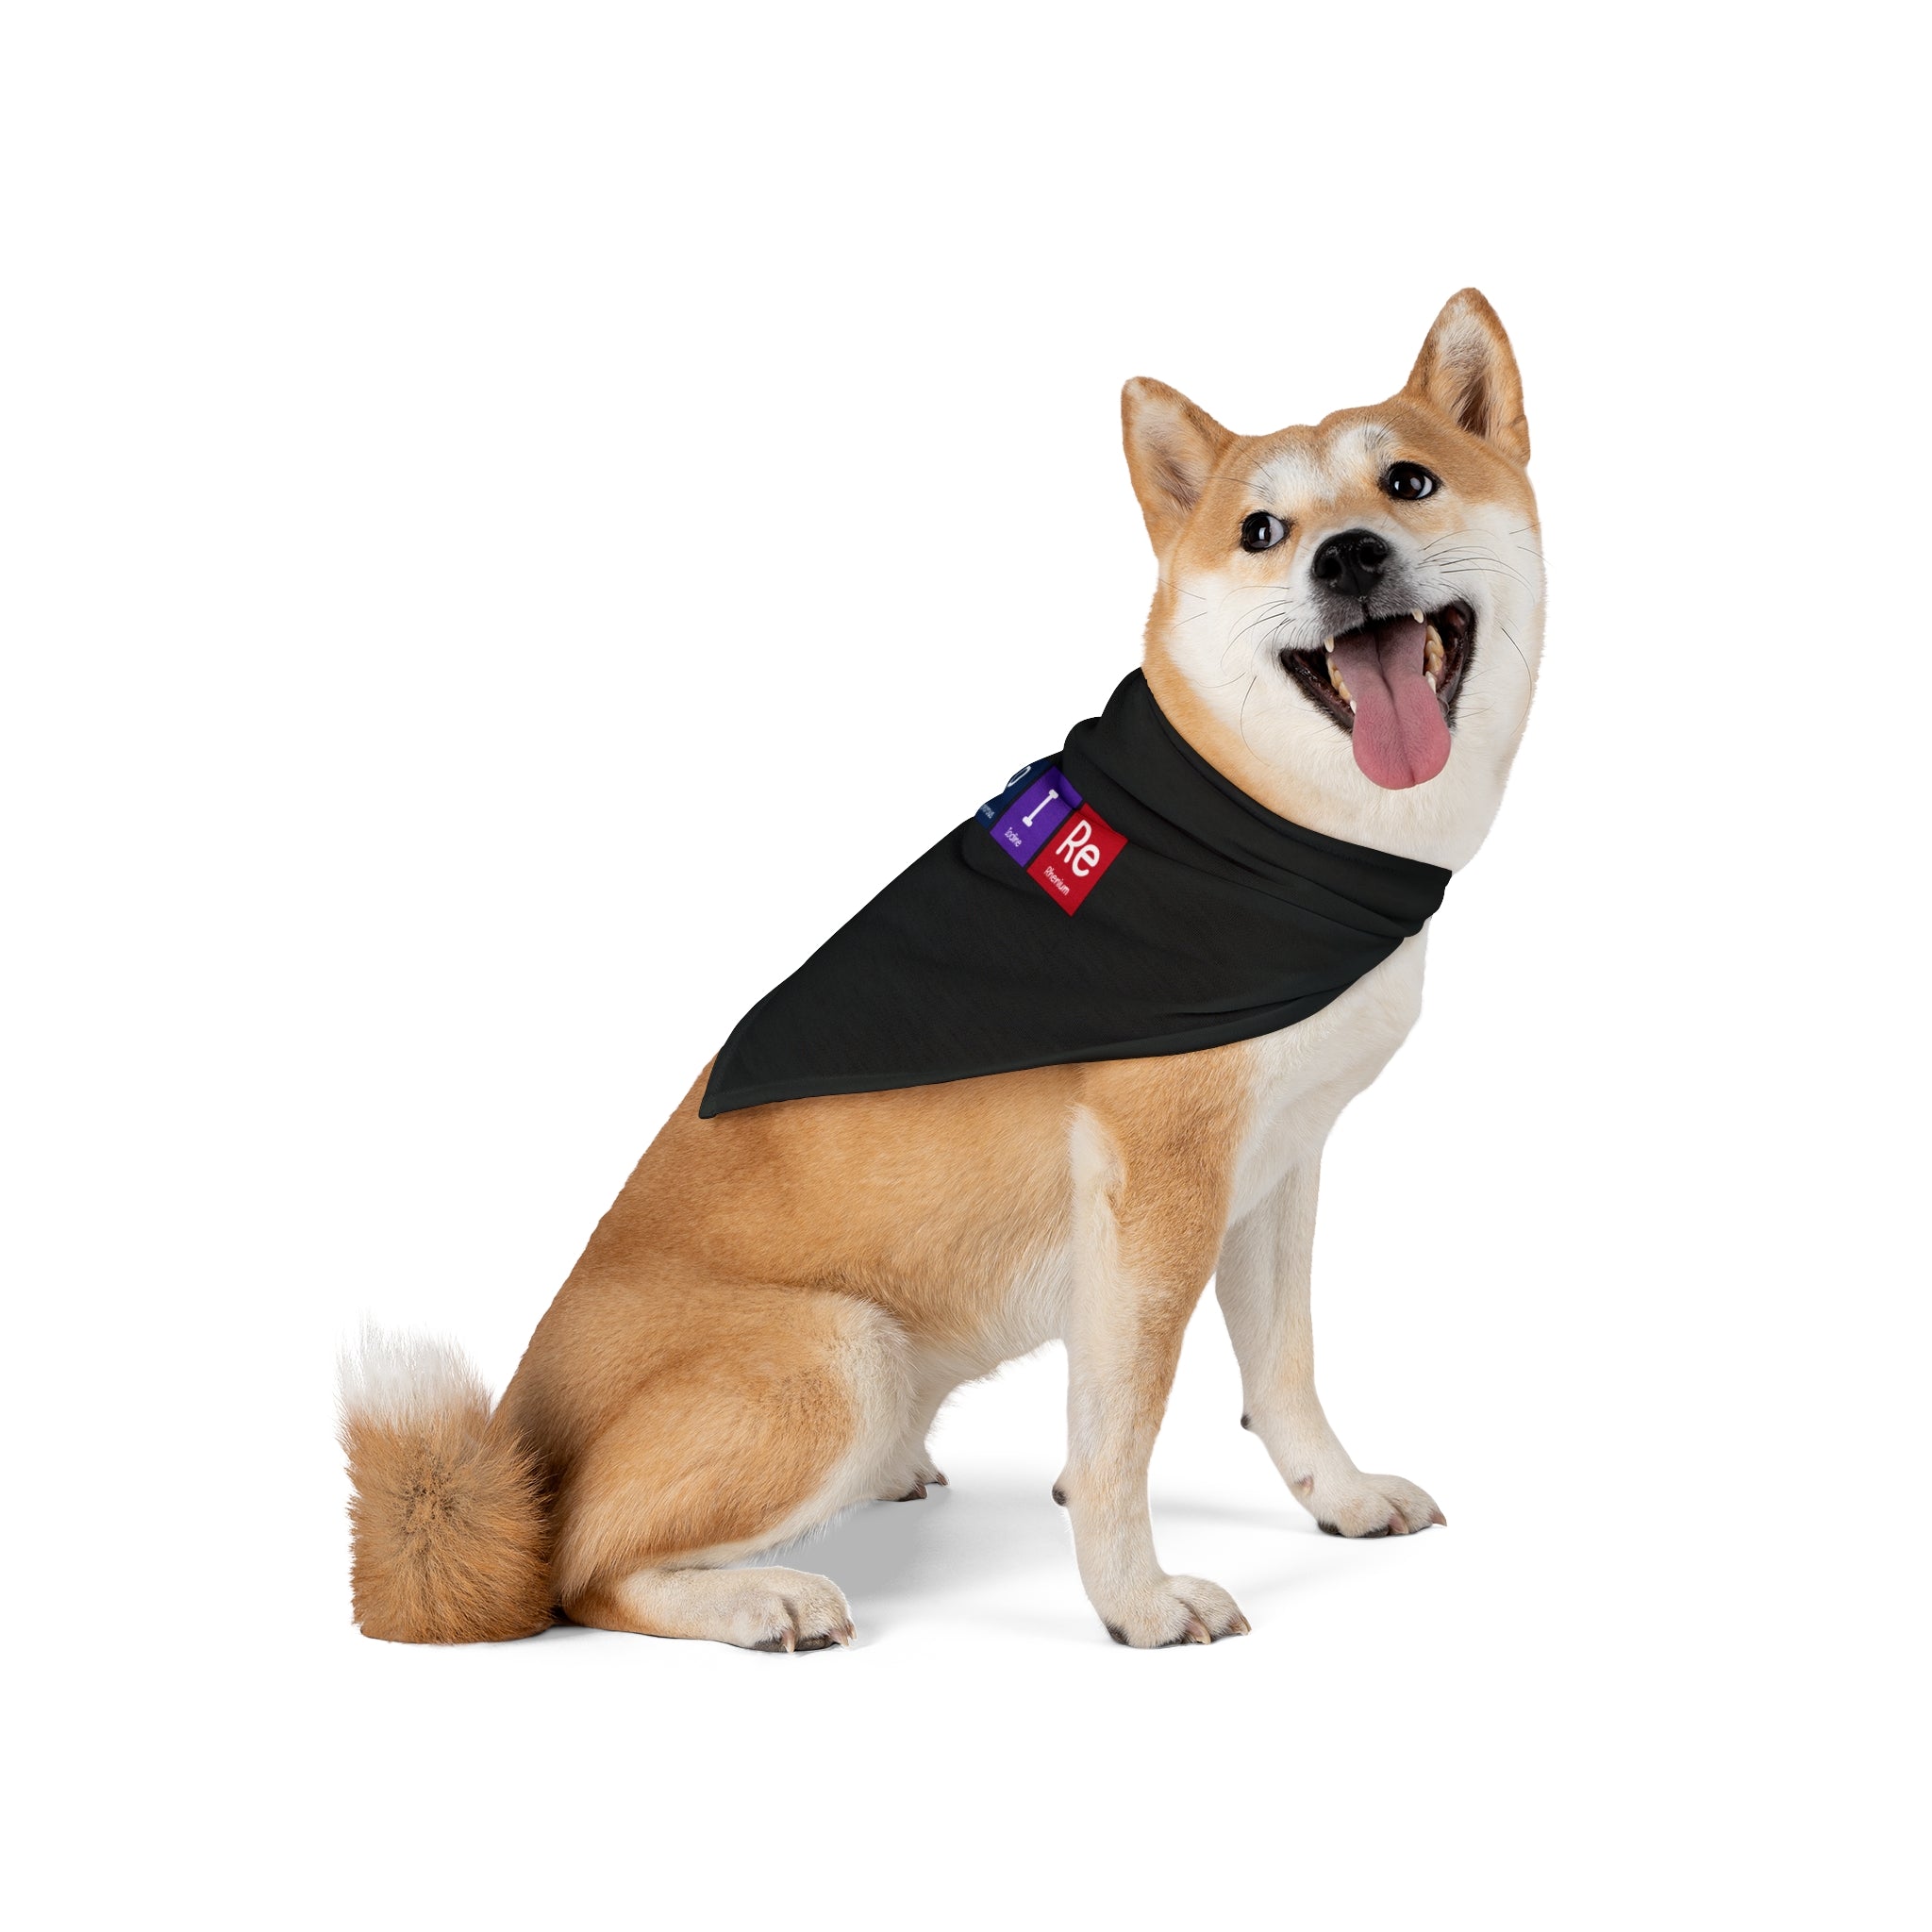 A Shiba Inu dog sits facing the camera with its tongue out, showcasing an In-S-P-I-Re - Pet Bandana adorned with colorful patches. Made from soft-spun polyester, this pet bandana adds a touch of charm to the pet's style, capturing its happy expression perfectly.